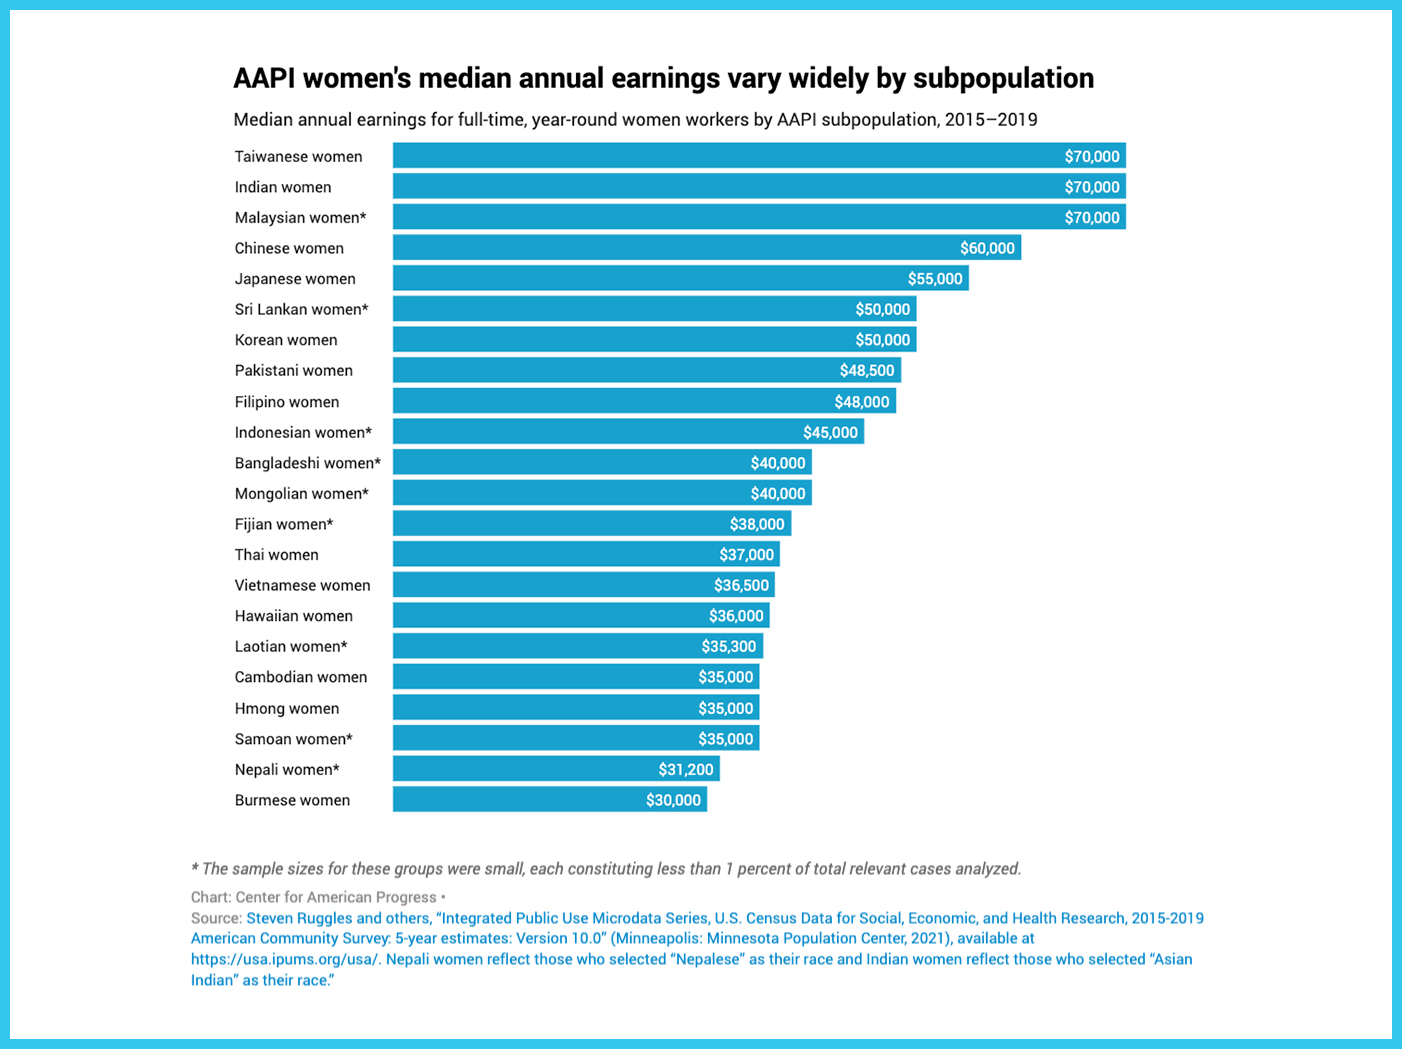 AAPI women's median annual earnings vary widely by subpopulation